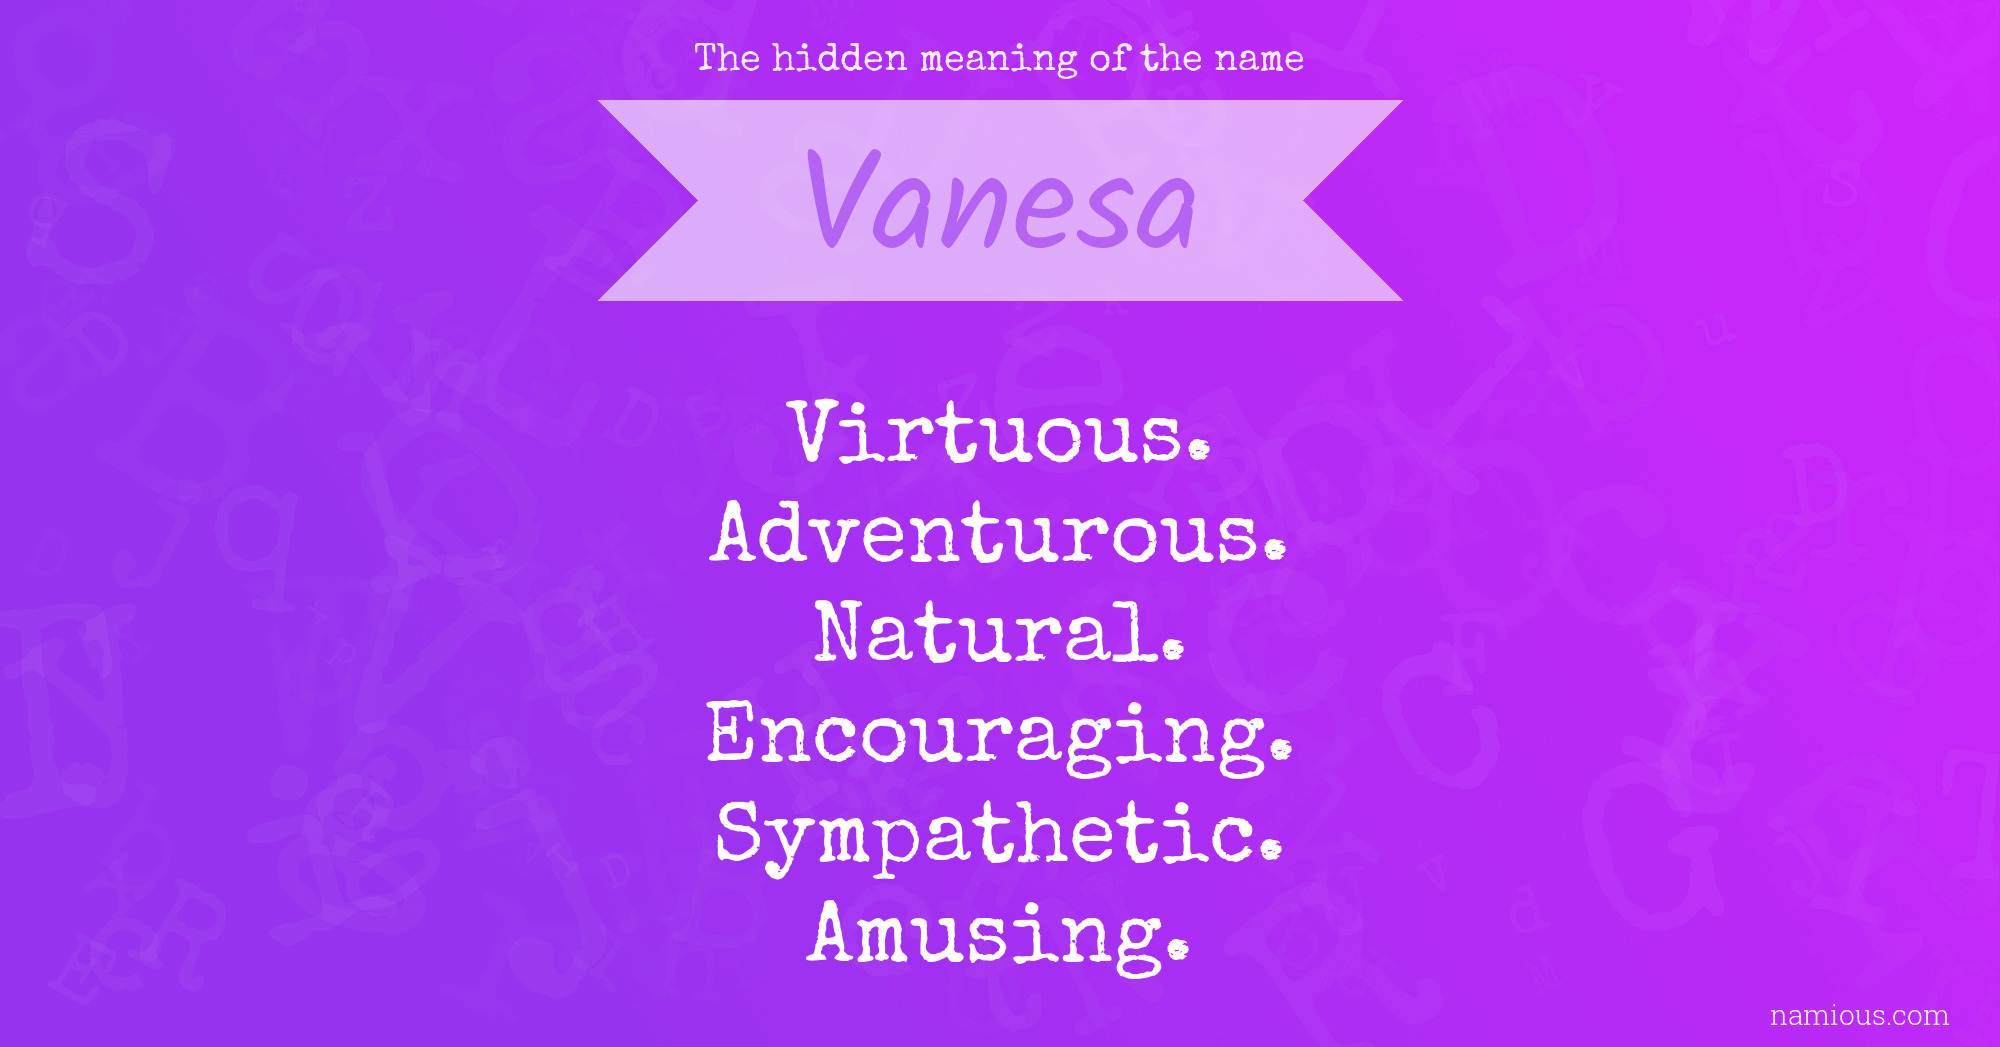 The hidden meaning of the name Vanesa